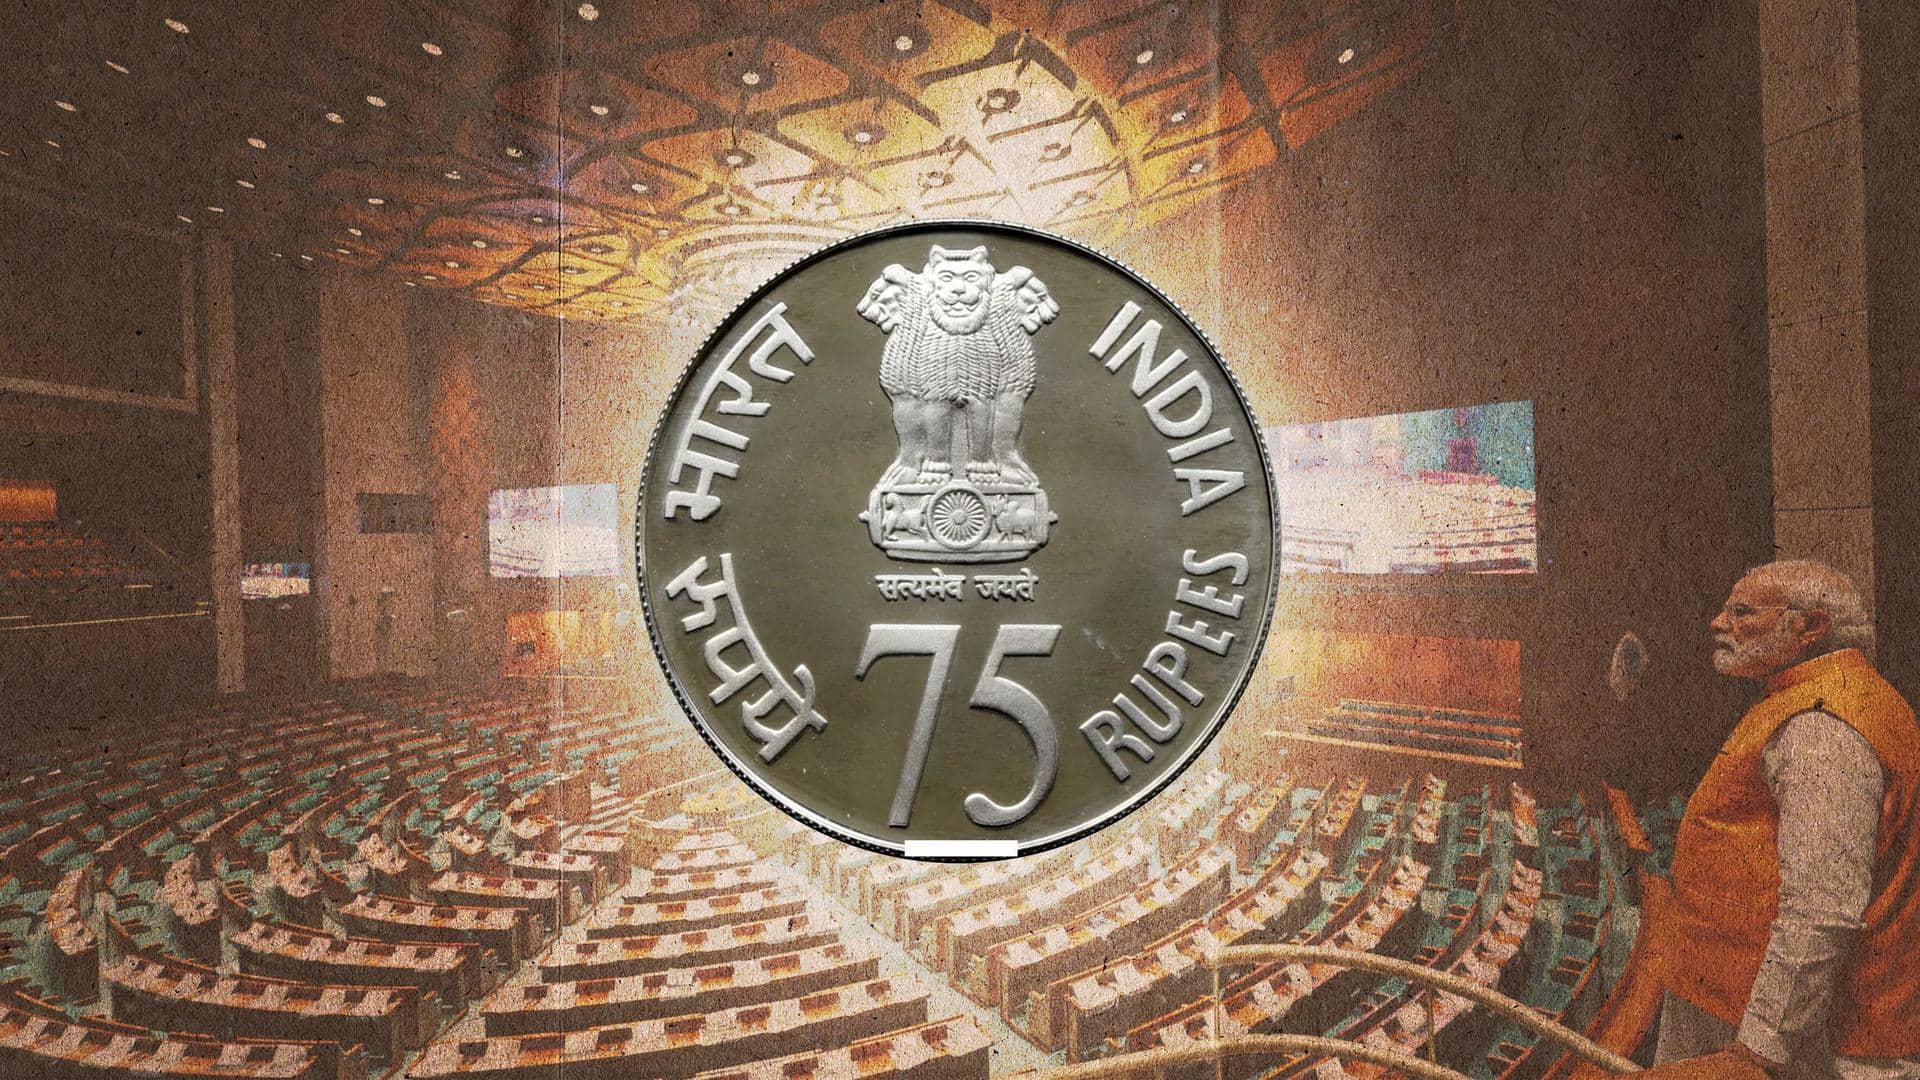 Rs. 75 coin to mark new Parliament launch amid boycott